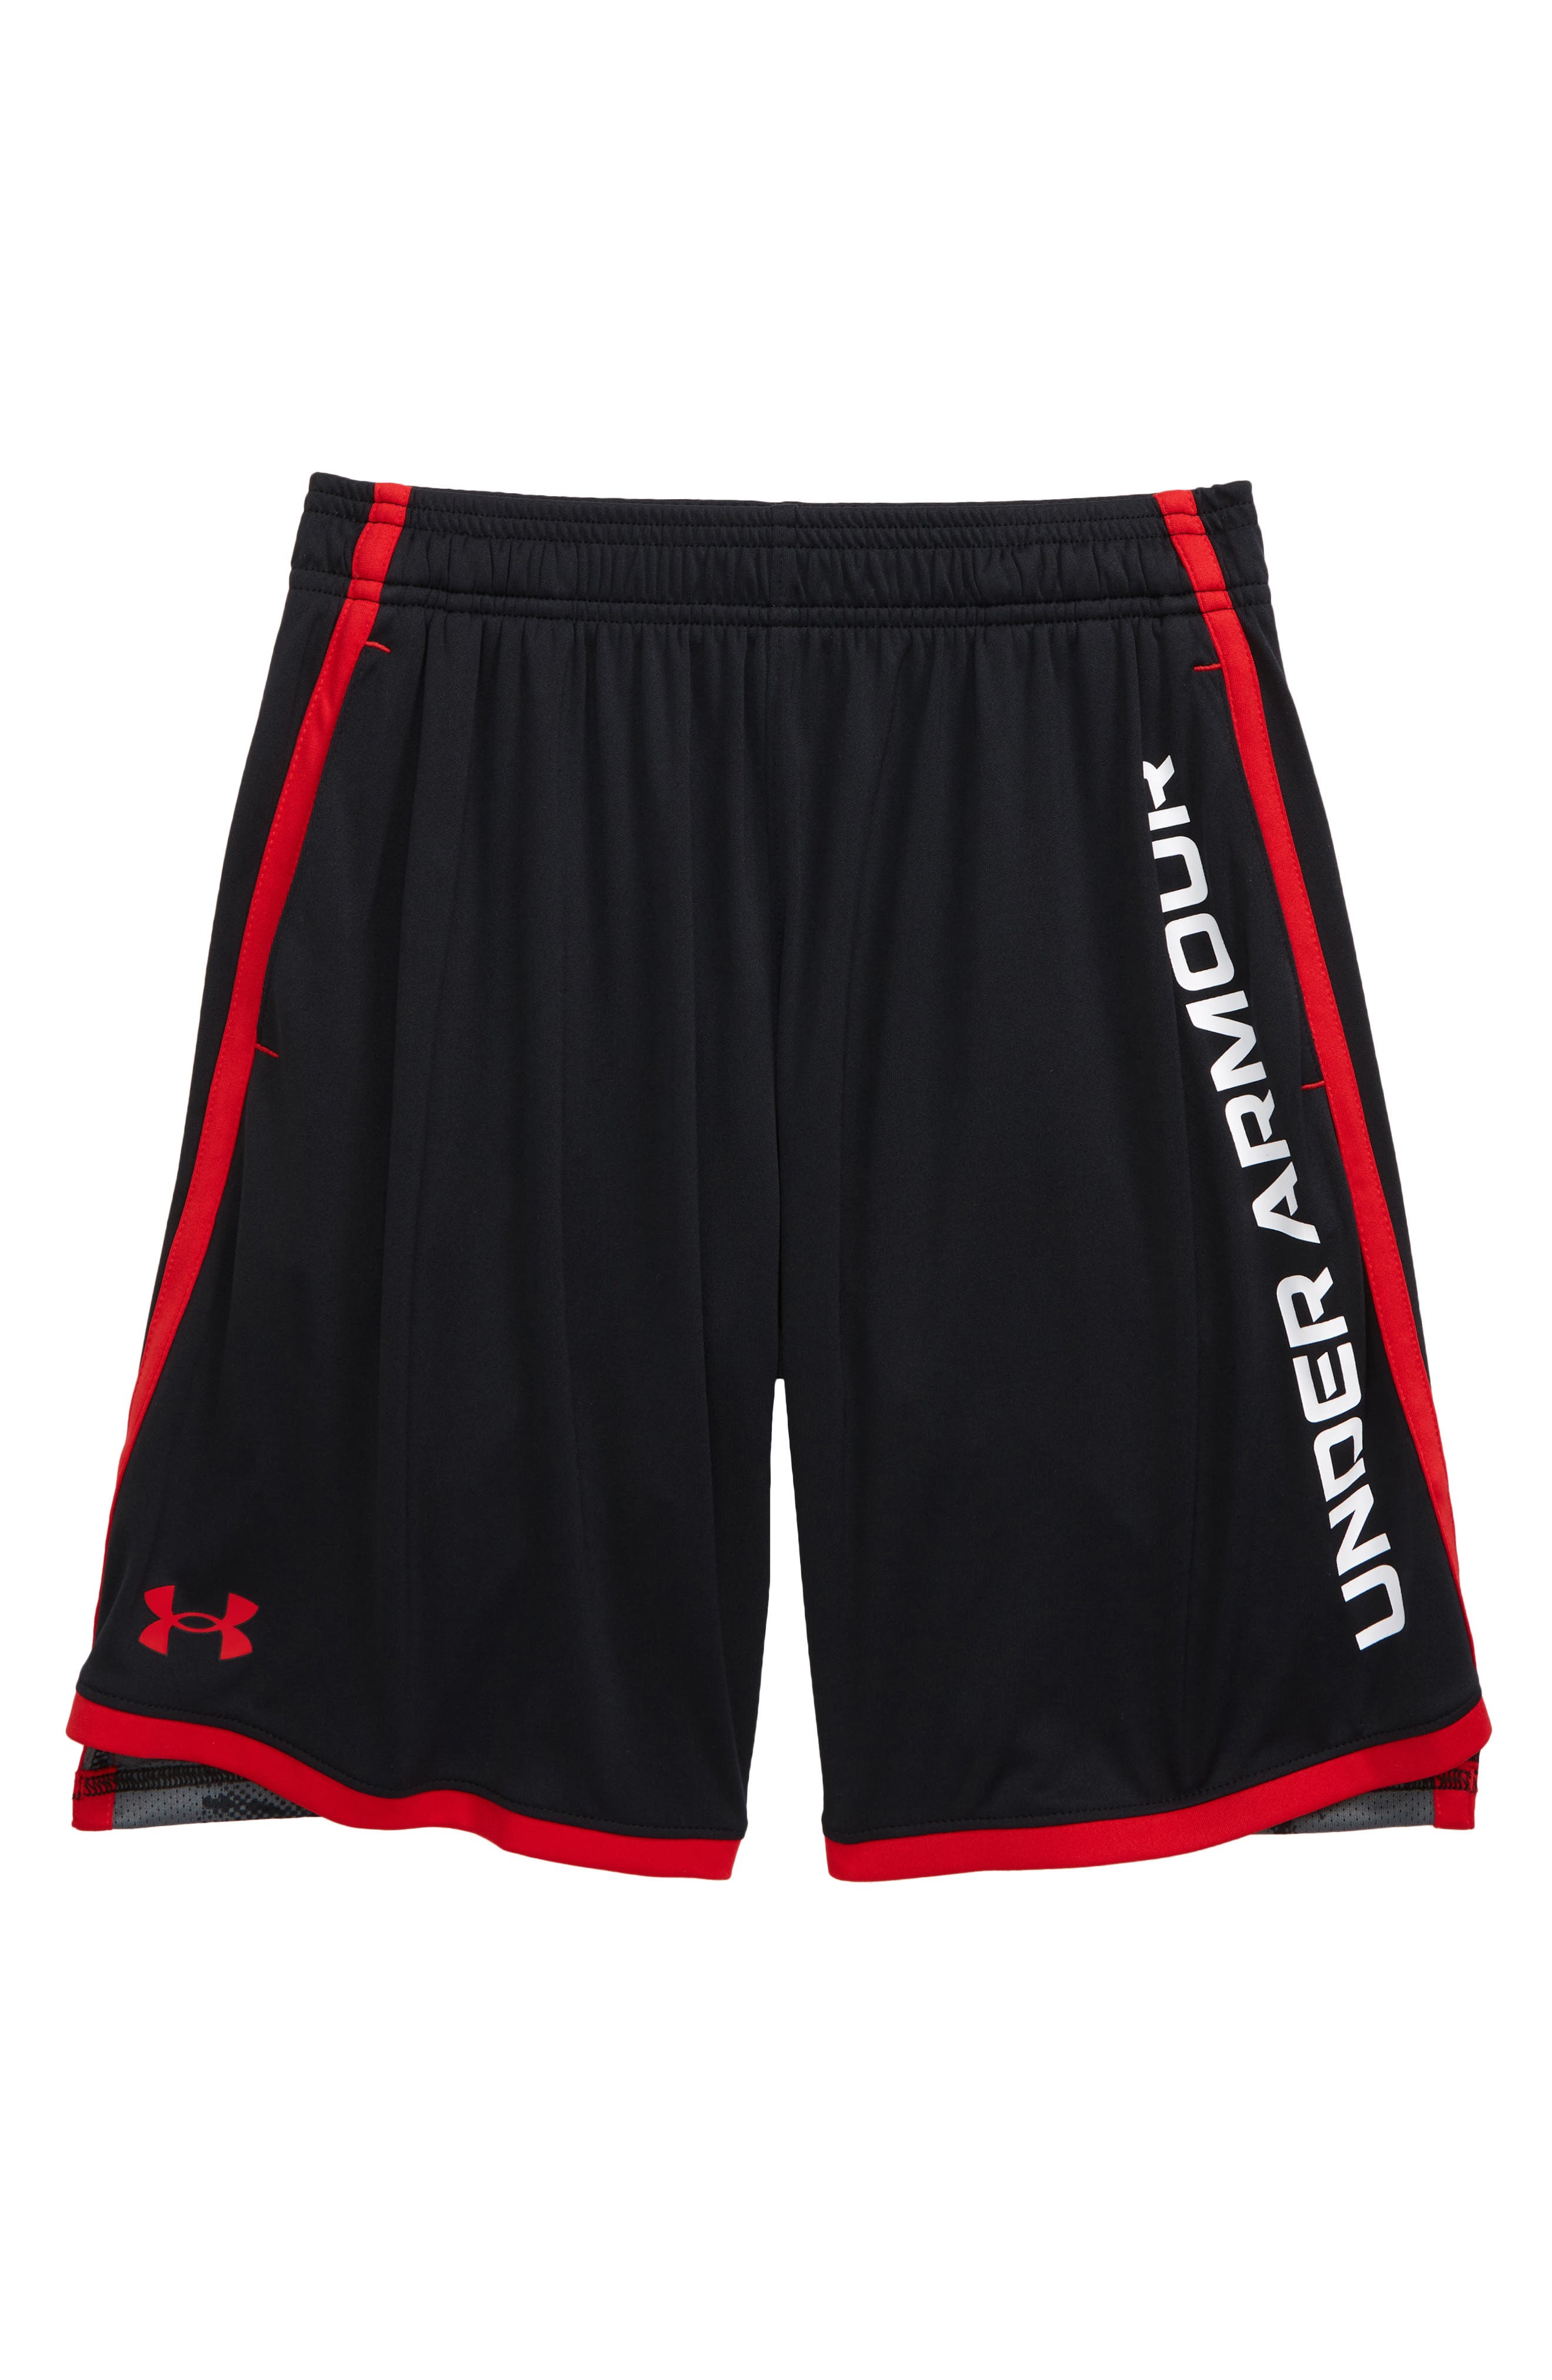 Under Armour Stunt 3.0 Shorts //White Youth Small 001 Black